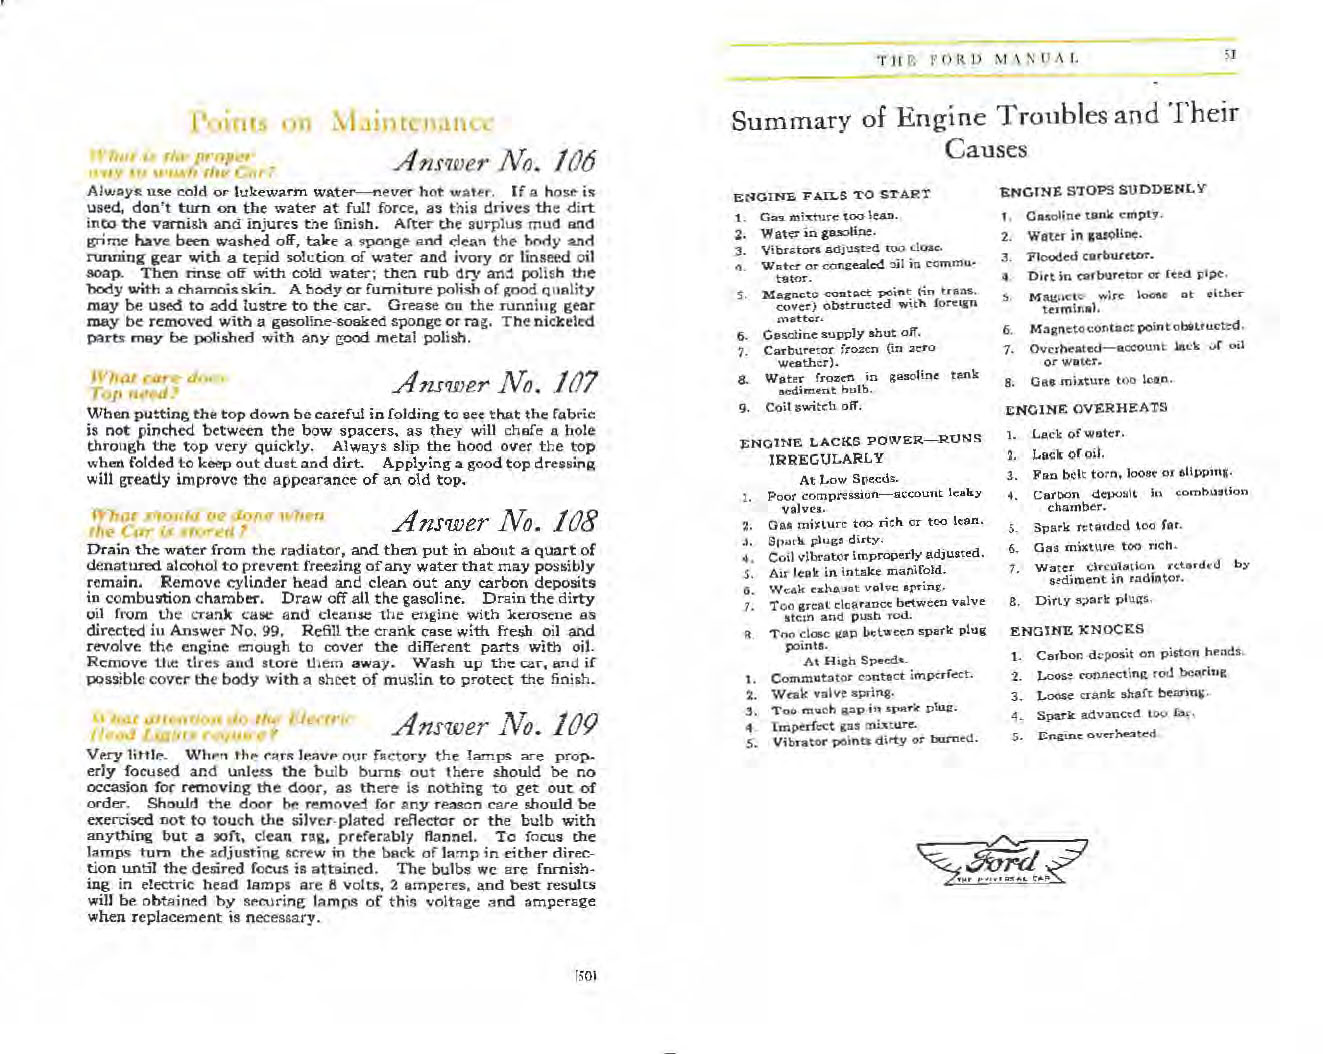 1917_Ford_Owners_Manual-50-51